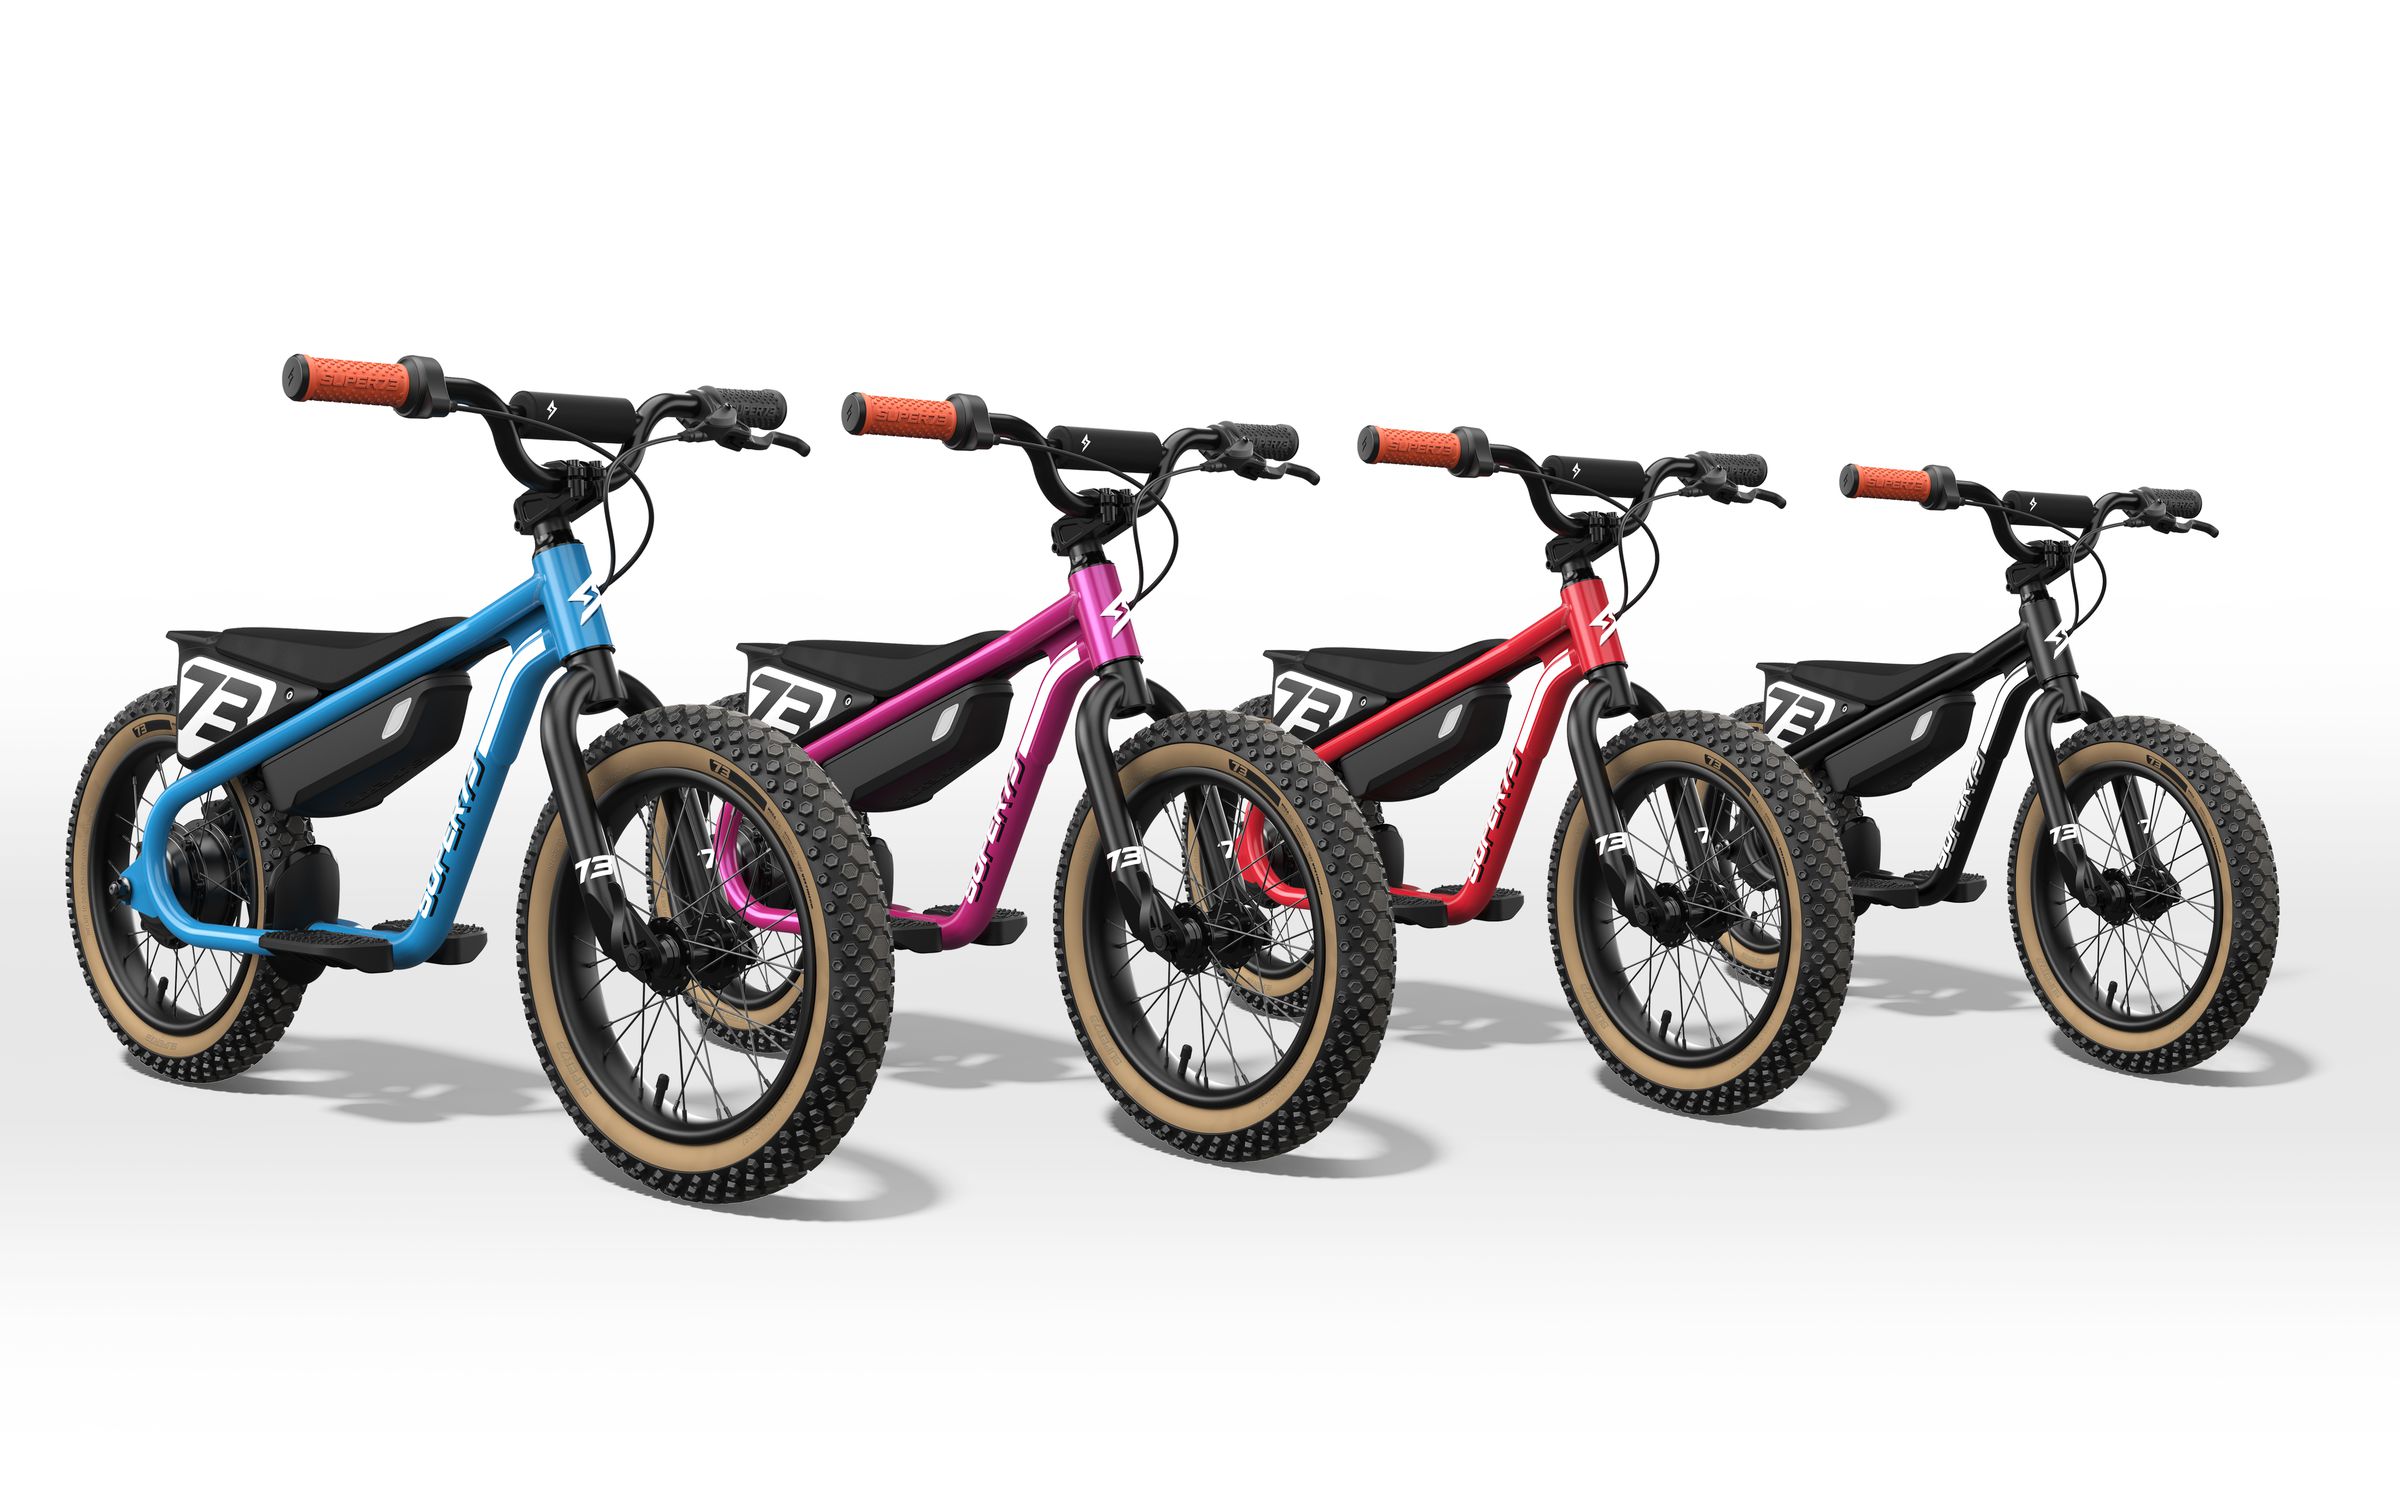 The K1D electric balance bike comes in four colors.